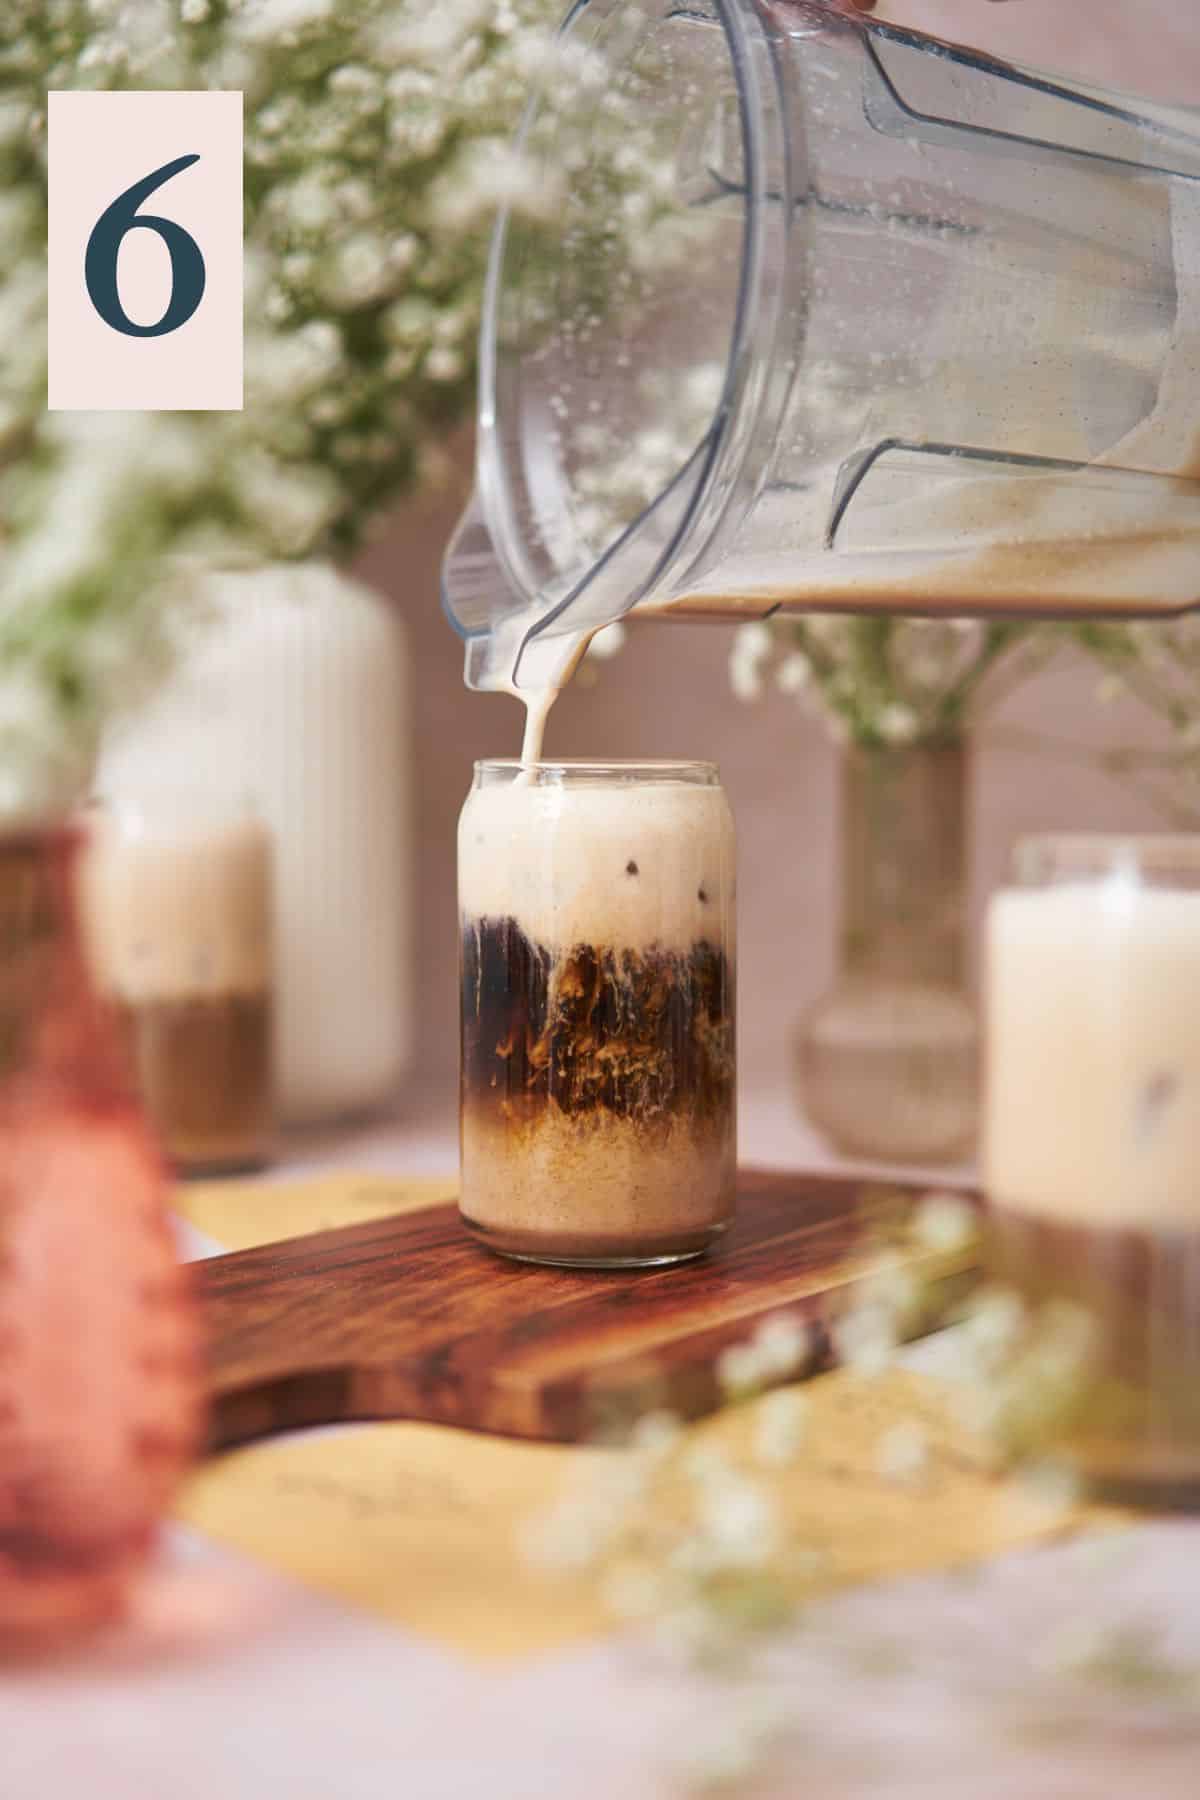 pouring a creamy white mixture into a glass with ice and coffee, surrounded by glasses, and vases with small white baby's breath flowers.